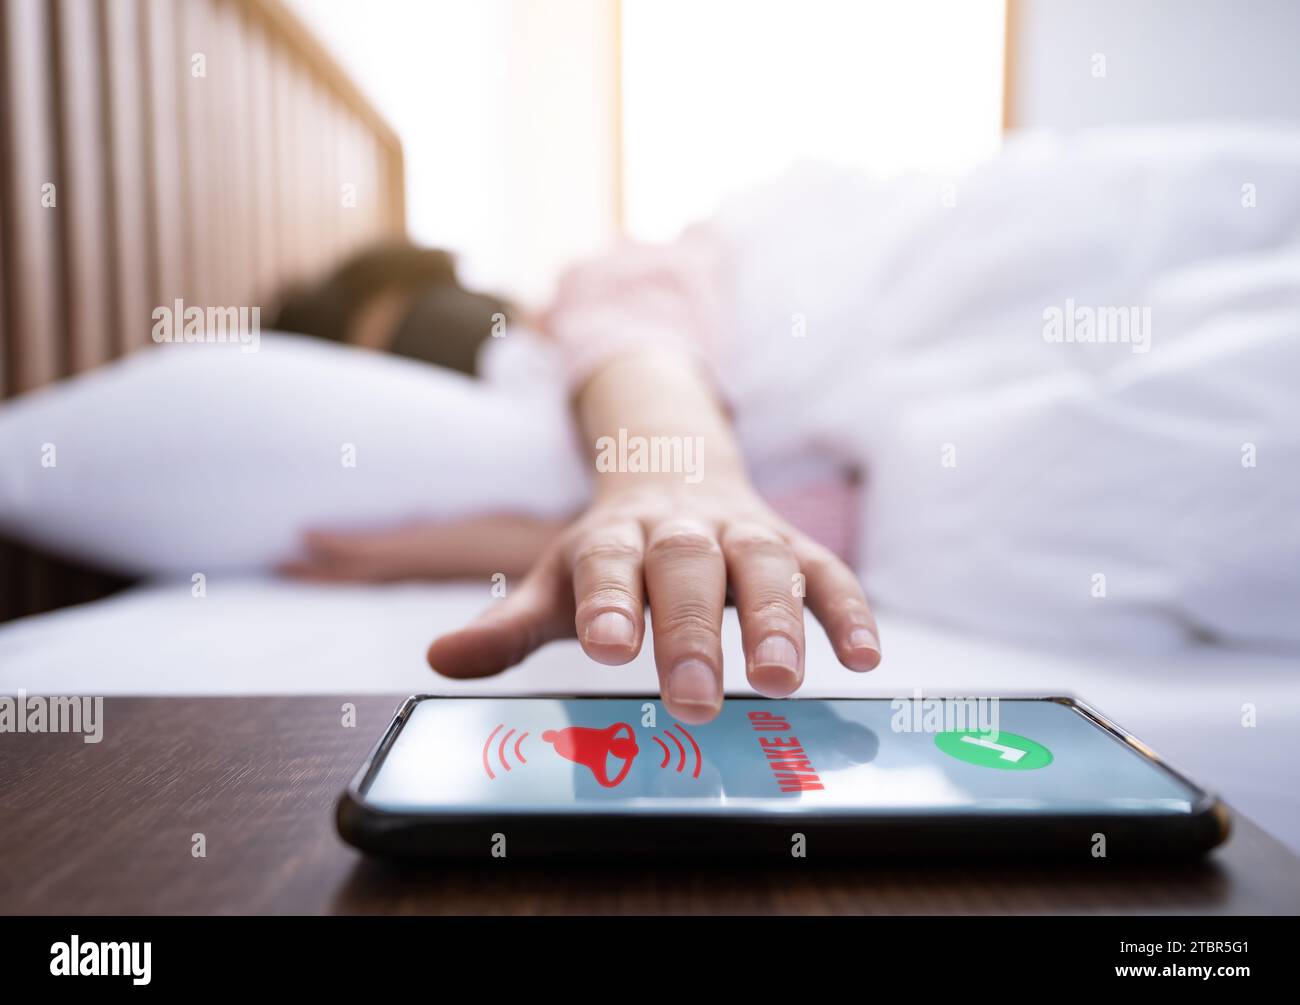 A woman wearing an eyepatch tries to touch her smartphone while waking up from sleep Stock Photo